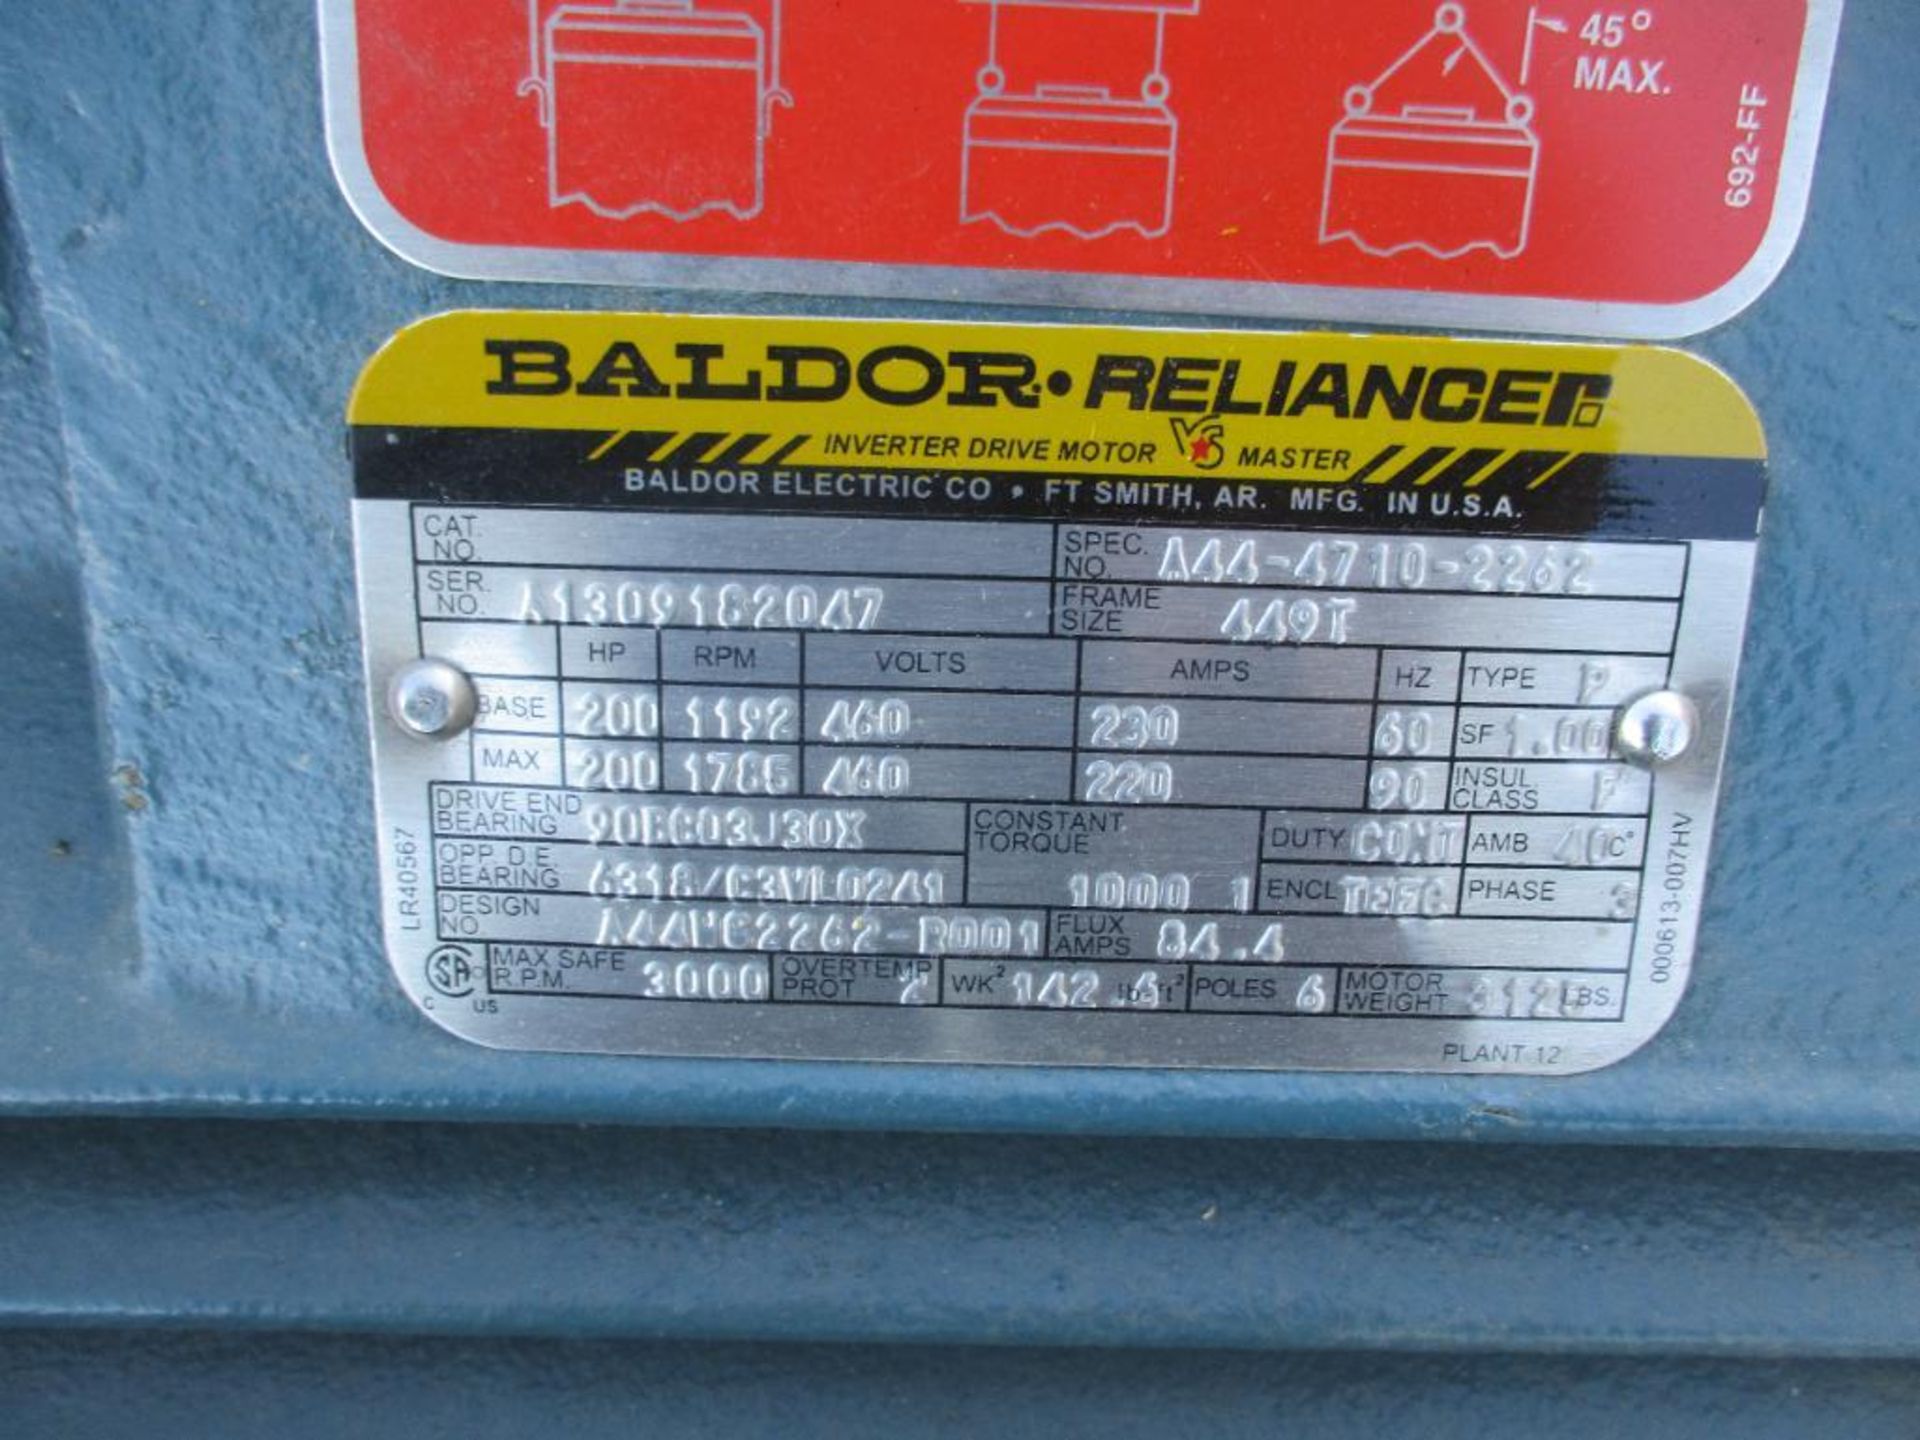 BALDOR 3 PHASE 200HP 1192-1785RPM 449T FRAME A/C MOTOR P/N A44-4710-2262 2916# LBS (THIS LOT IS FOB - Image 2 of 7